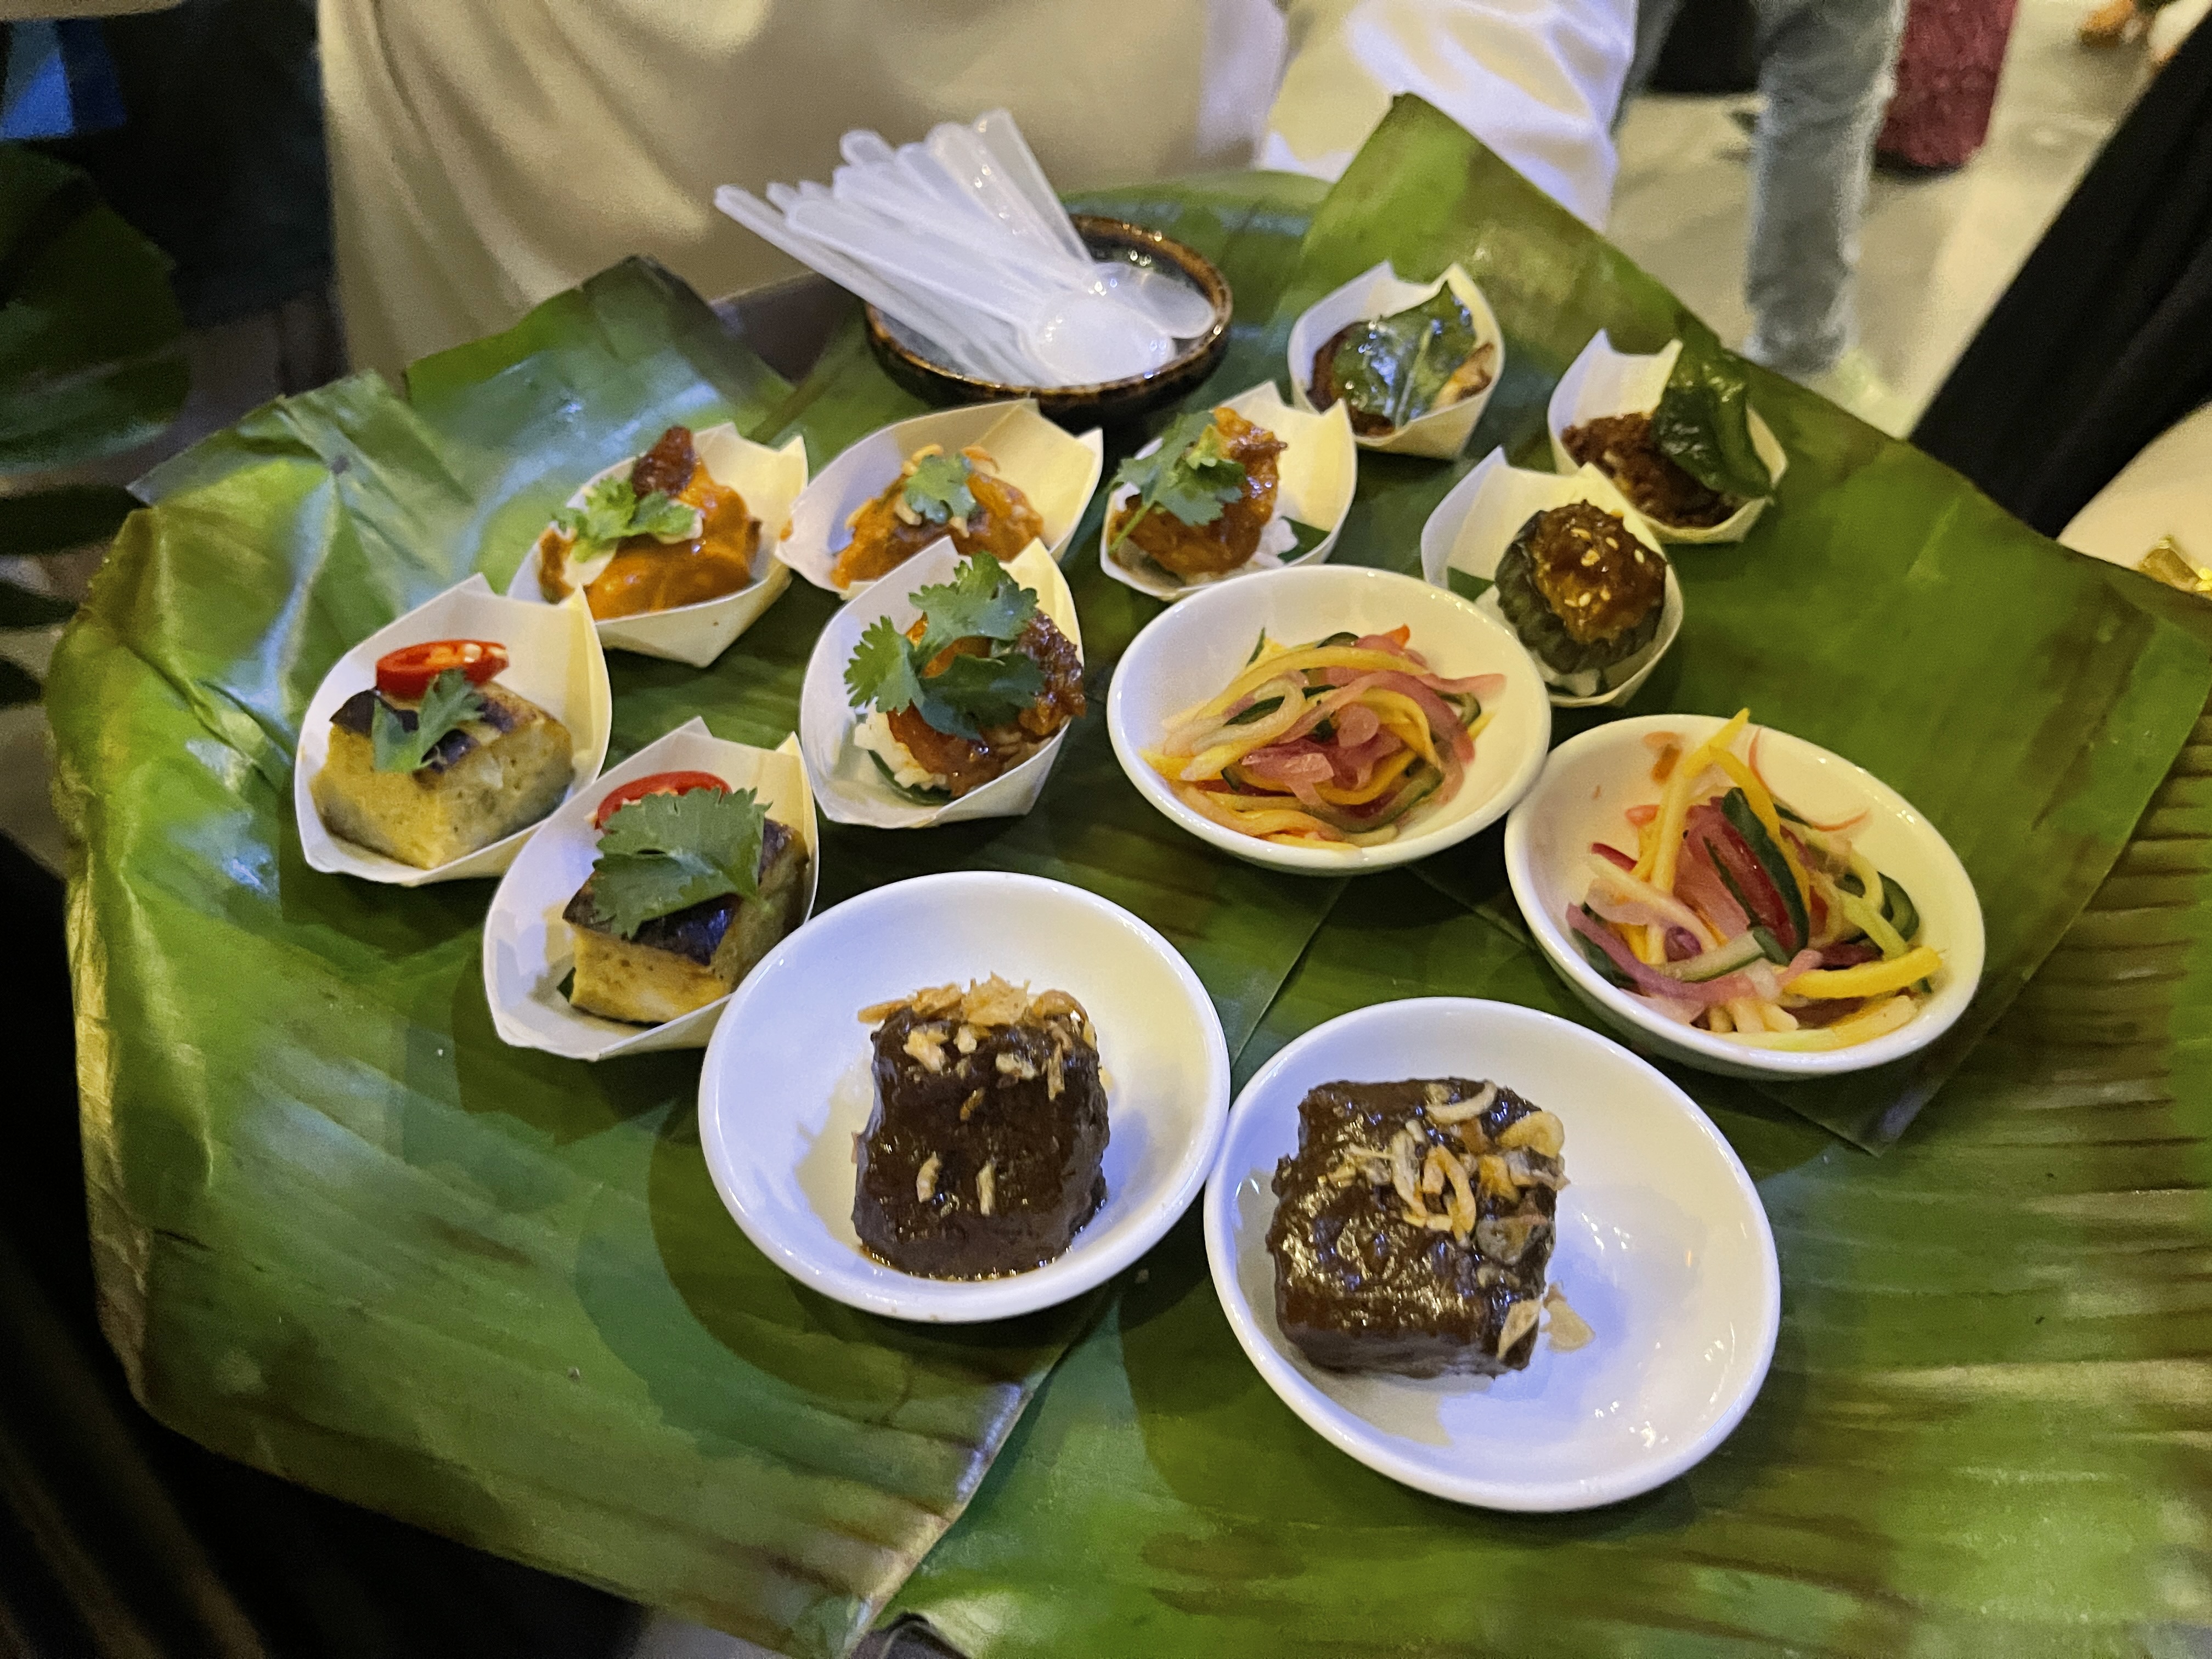 Malaysian food is served at the opening ceremony of Lesung restaurant on March 9, 2023. Photo: Dong Nguyen / Tuoi Tre News